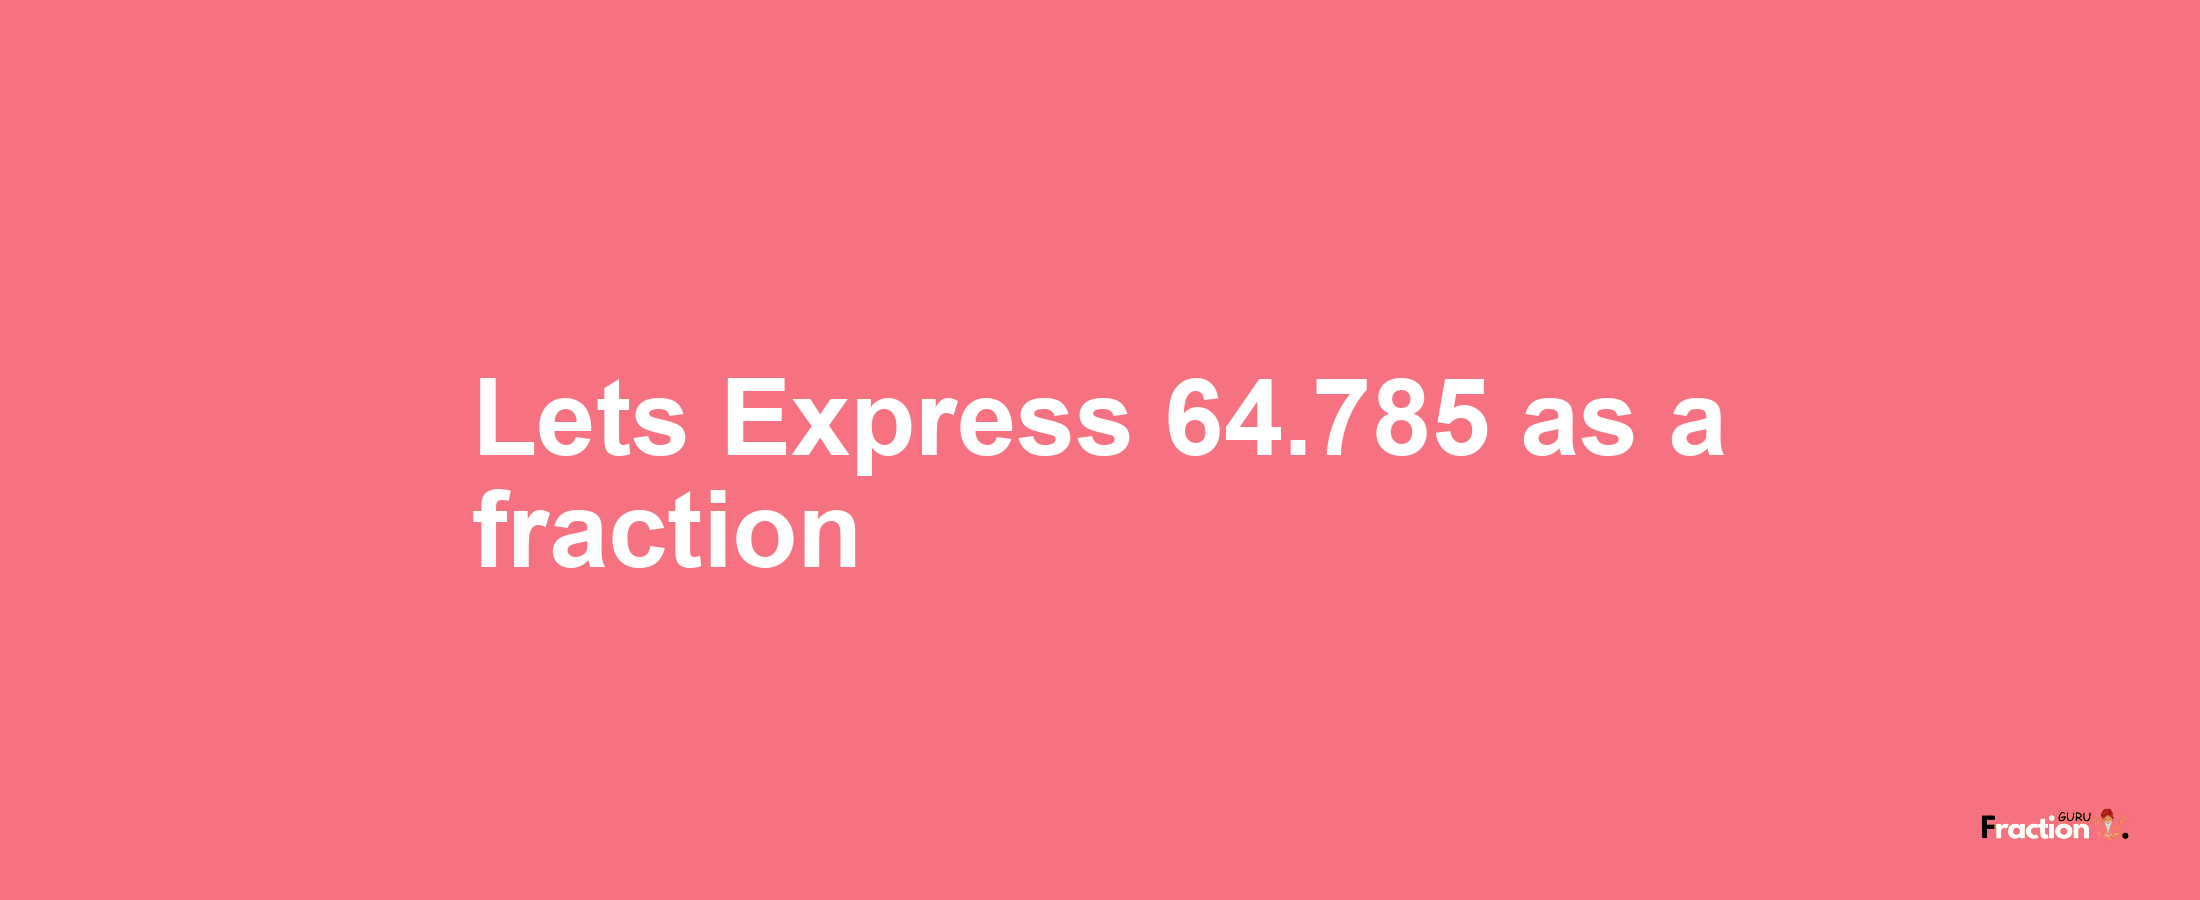 Lets Express 64.785 as afraction